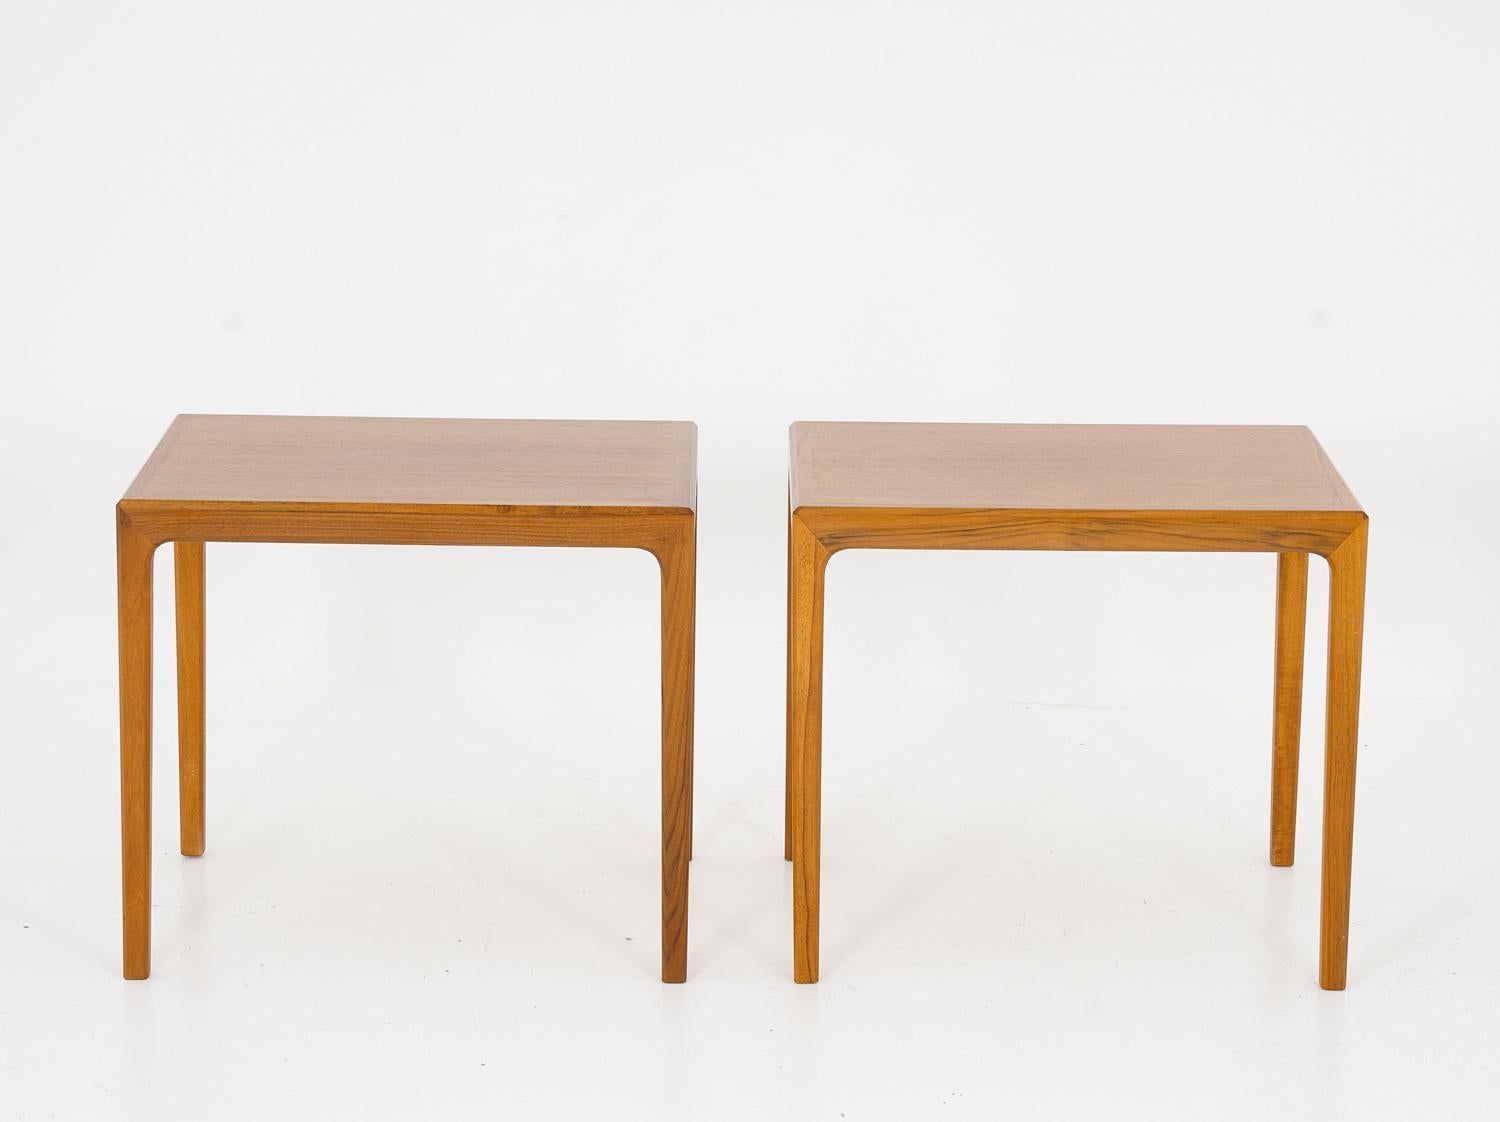 A pair of midcentury side tables in walnut by Bertil Fridhagen for Bodafors, Sweden.
These high-quality side tables have a minimalistic design with distinct lines.
Condition: Very good original condition with light signs of use and age